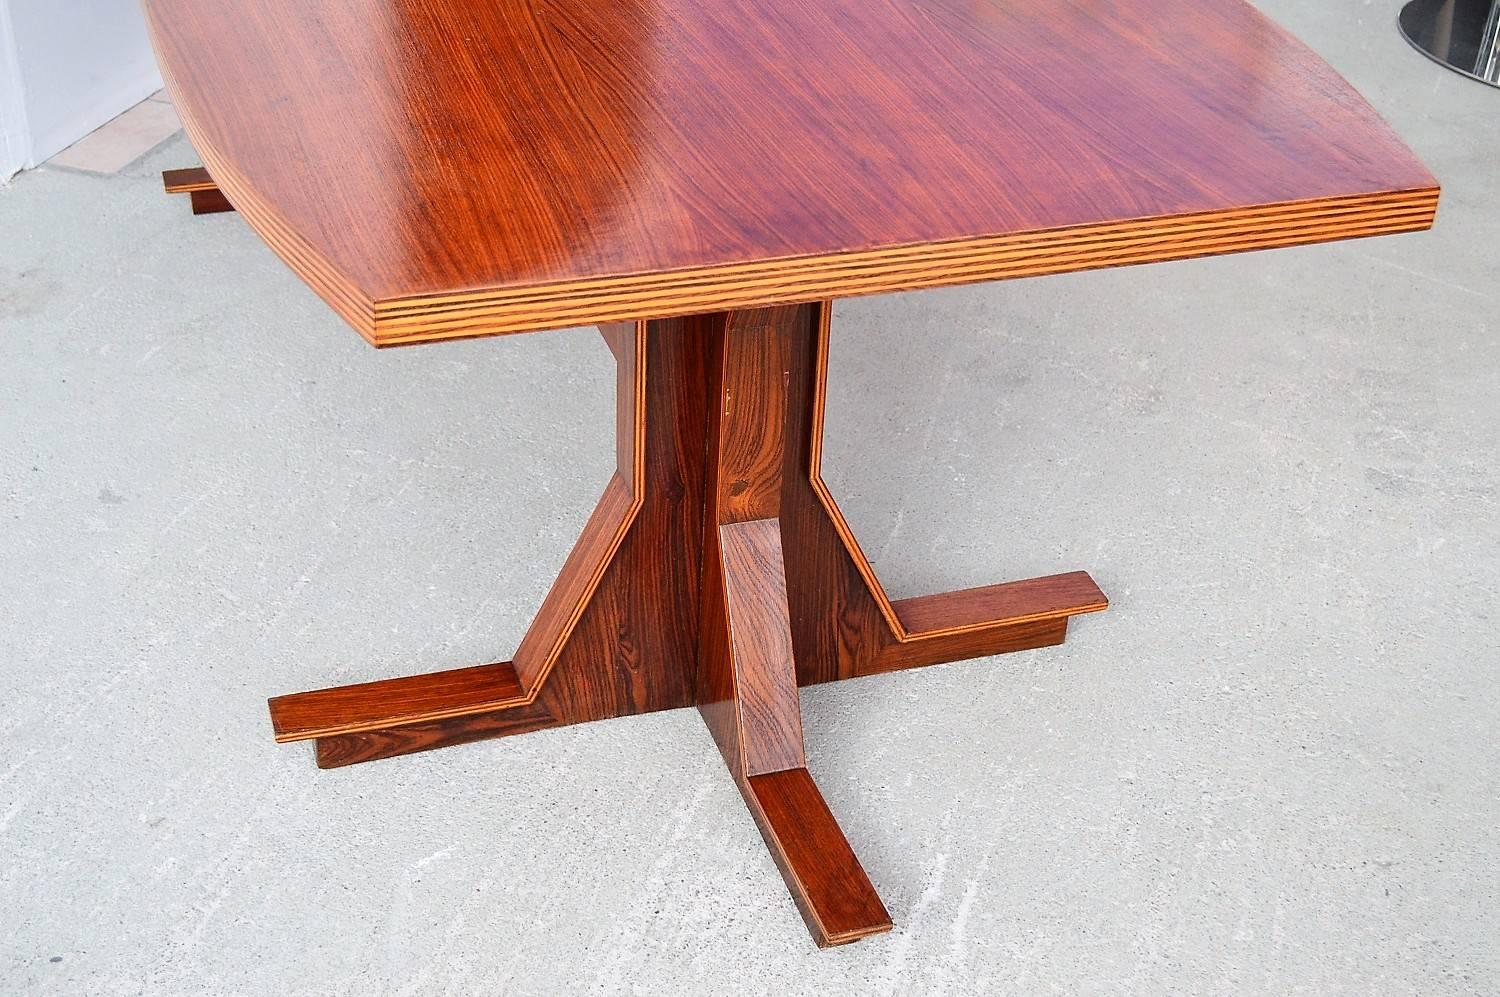 Plywood Italian Midcentury Dining or Conference Table, 1950s For Sale